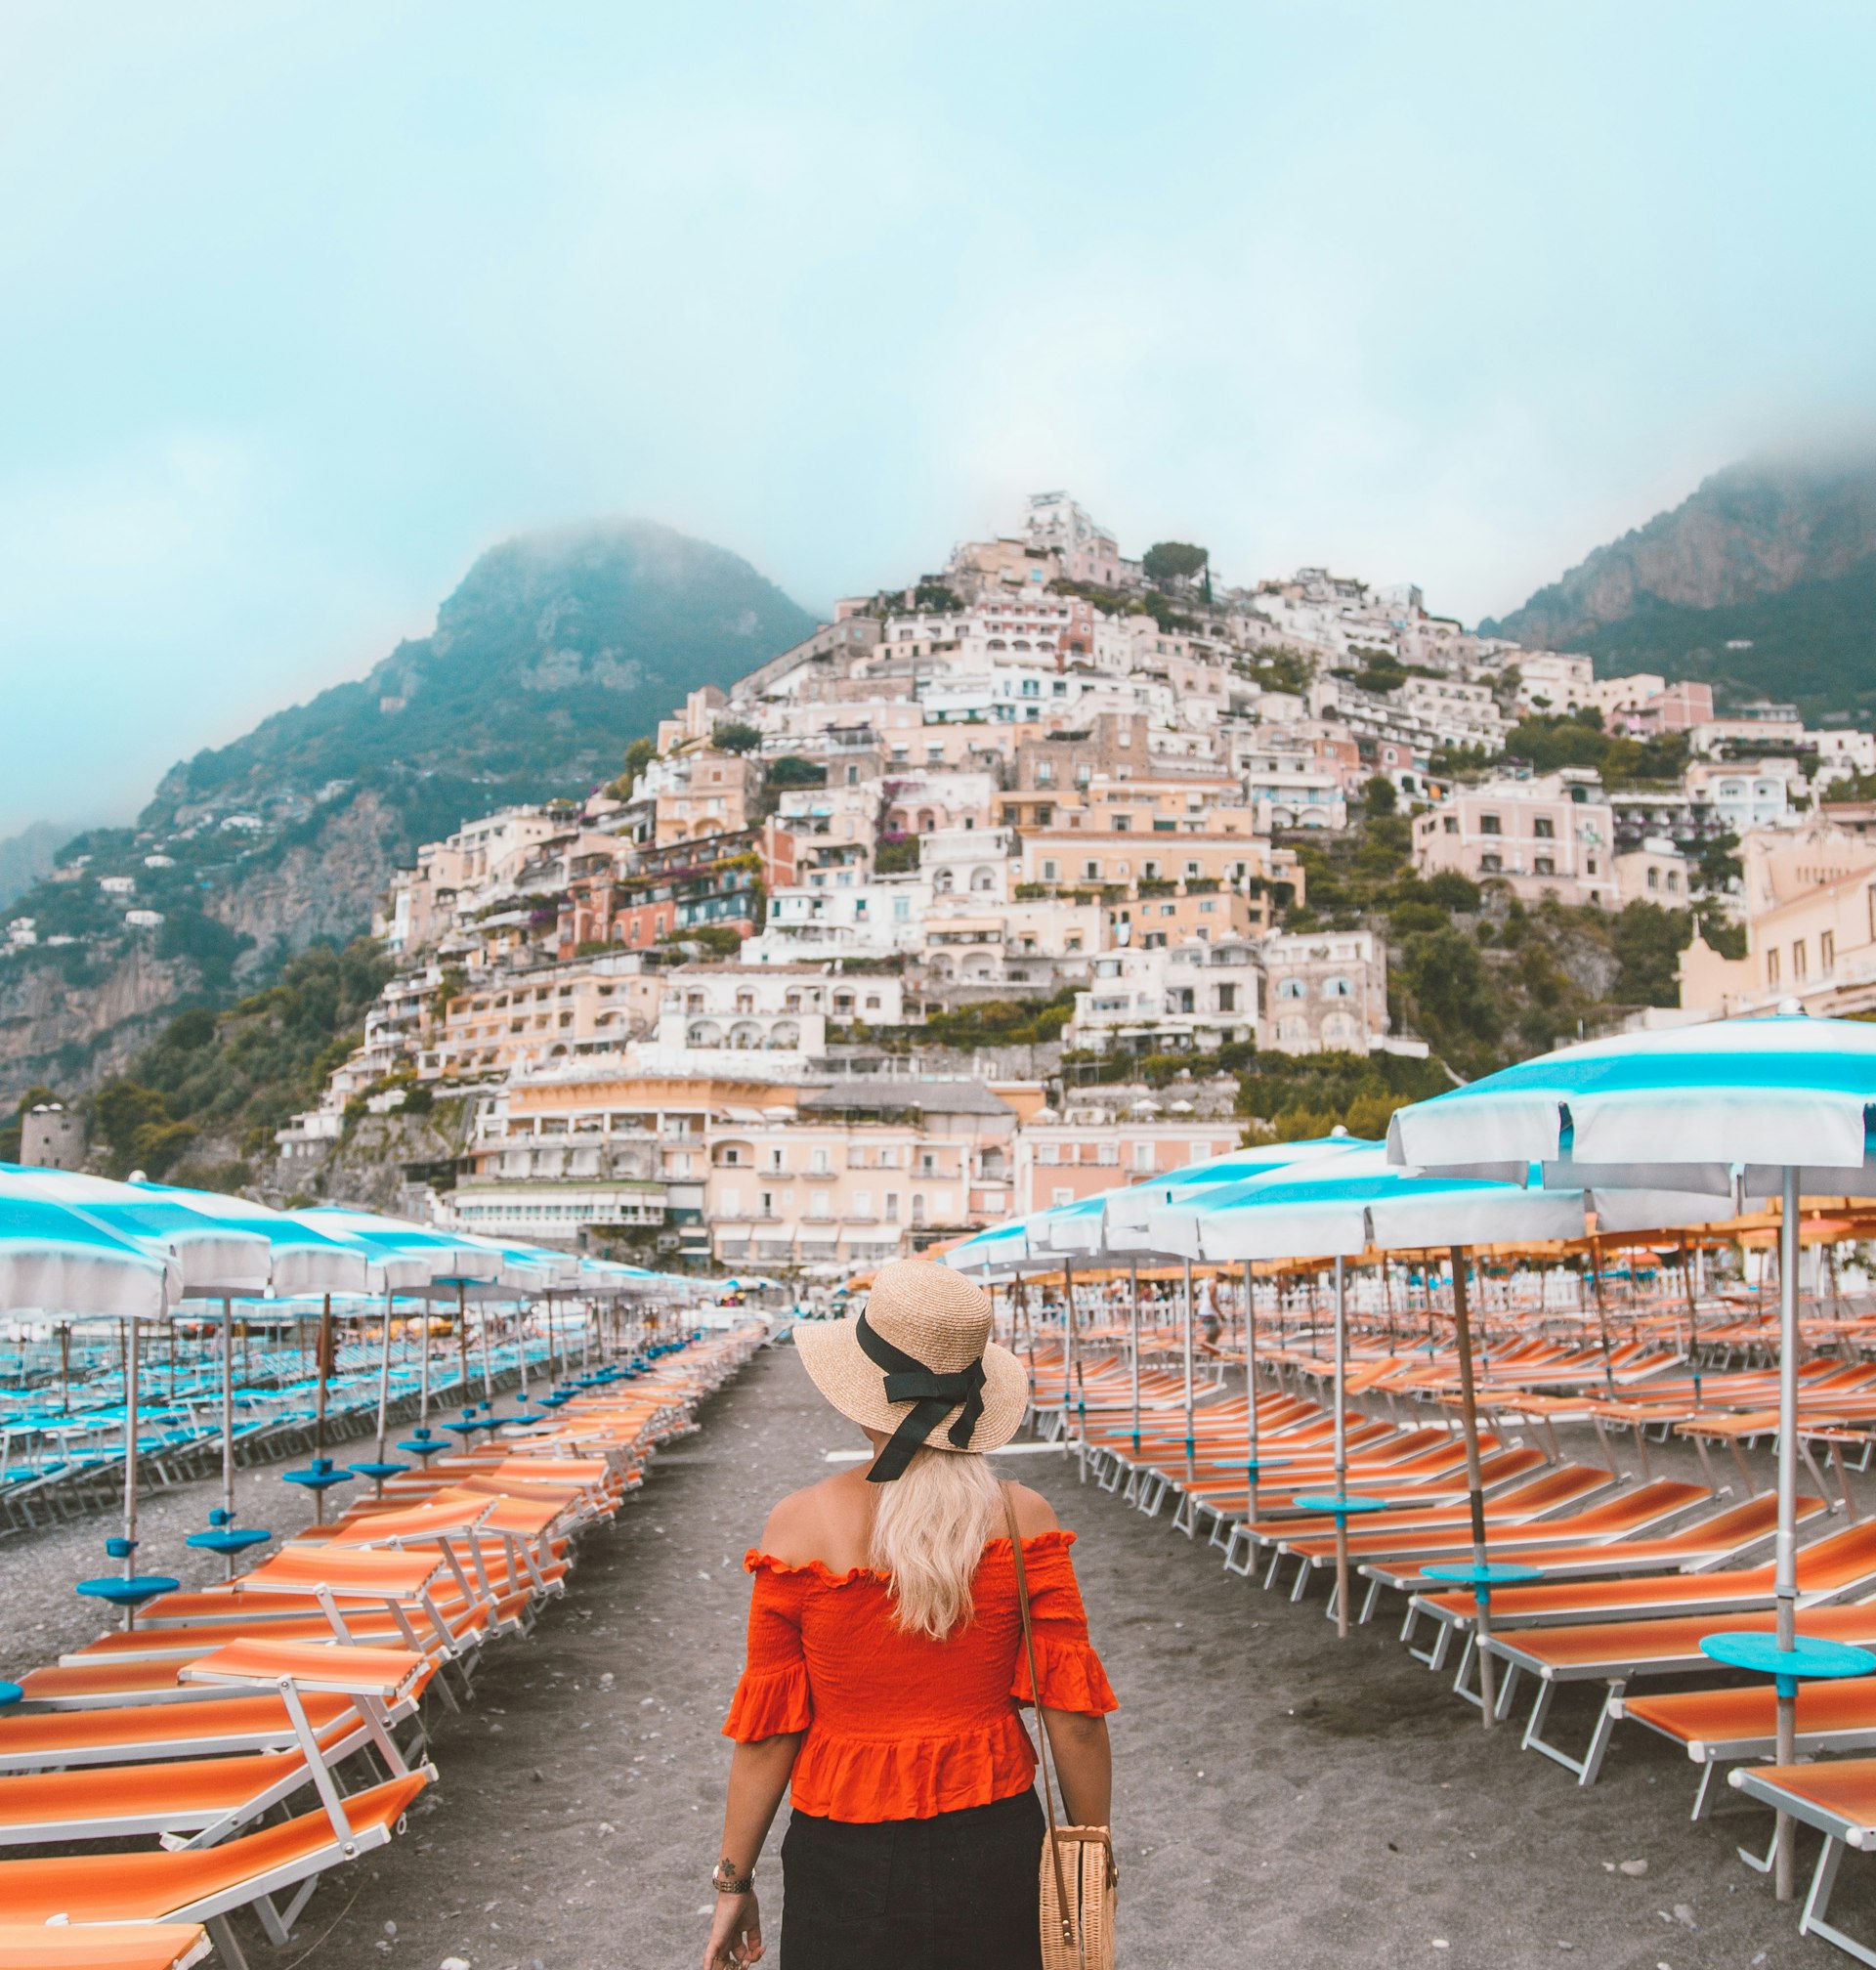 Young woman in front of Positano, Italy.